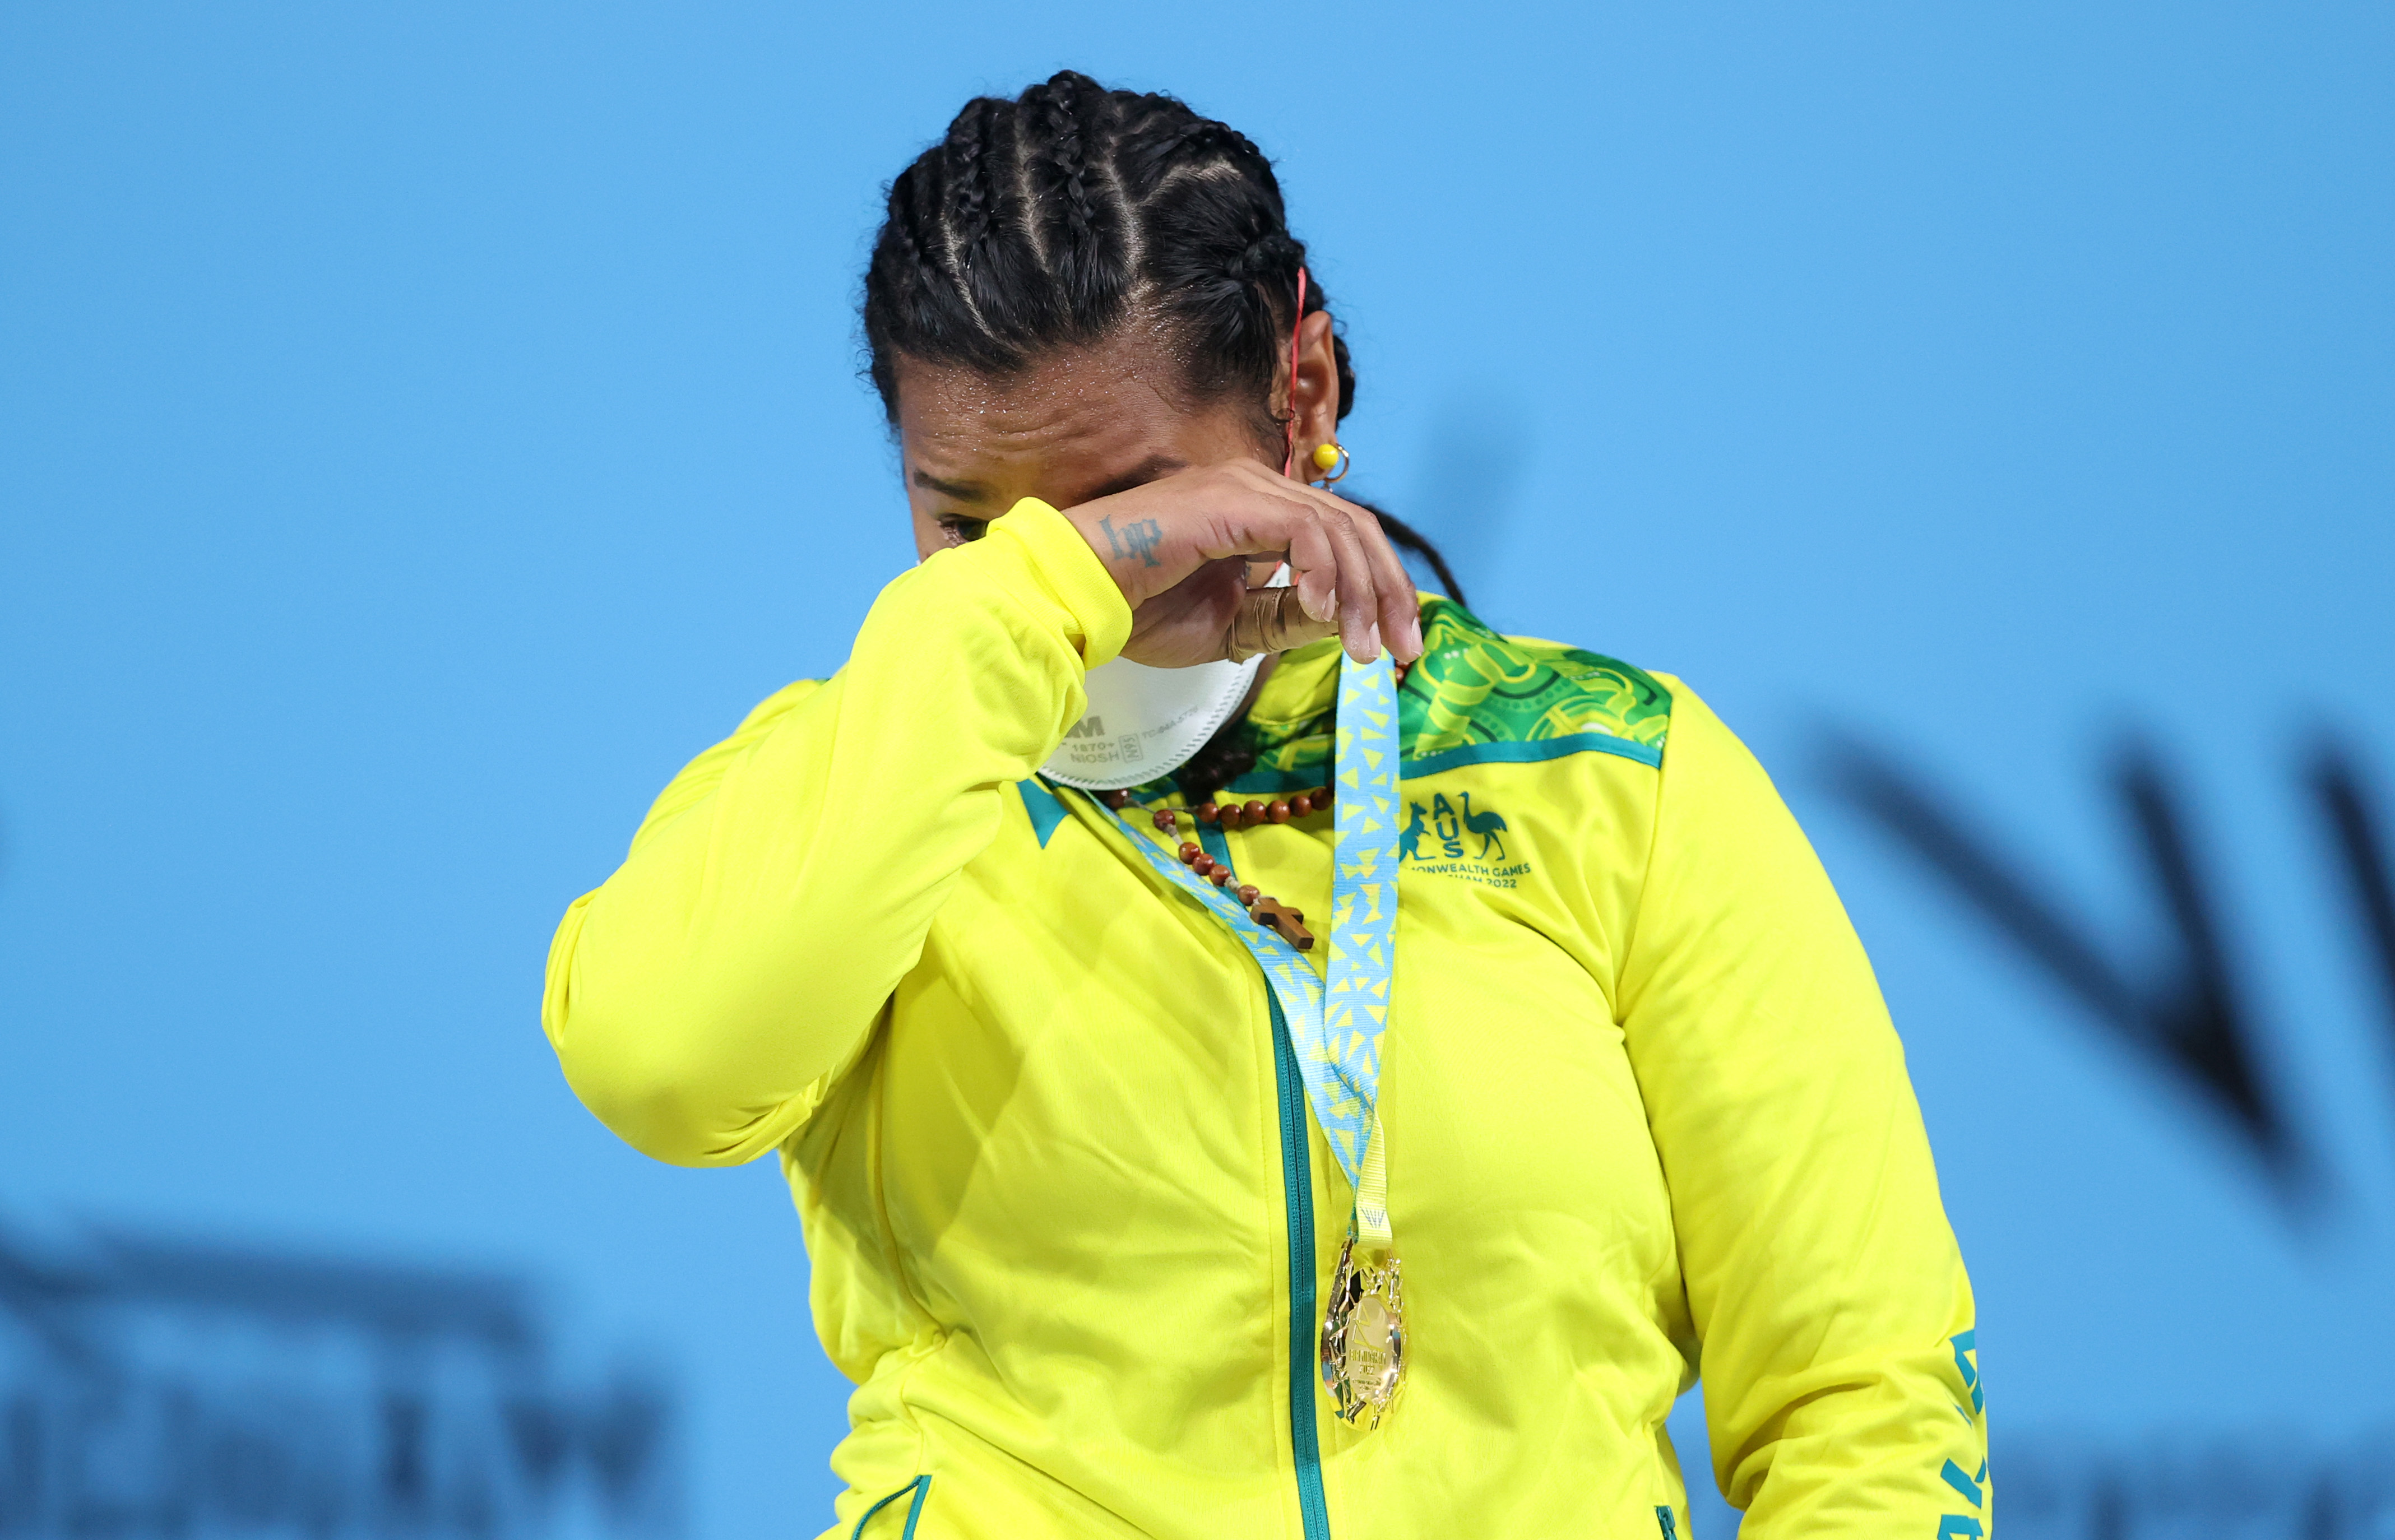 Eileen Cikamatana of Team Australia breaks down crying after winning gold in the women's 87kg weightlifting at the Birmingham 2022 Commonwealth Games.